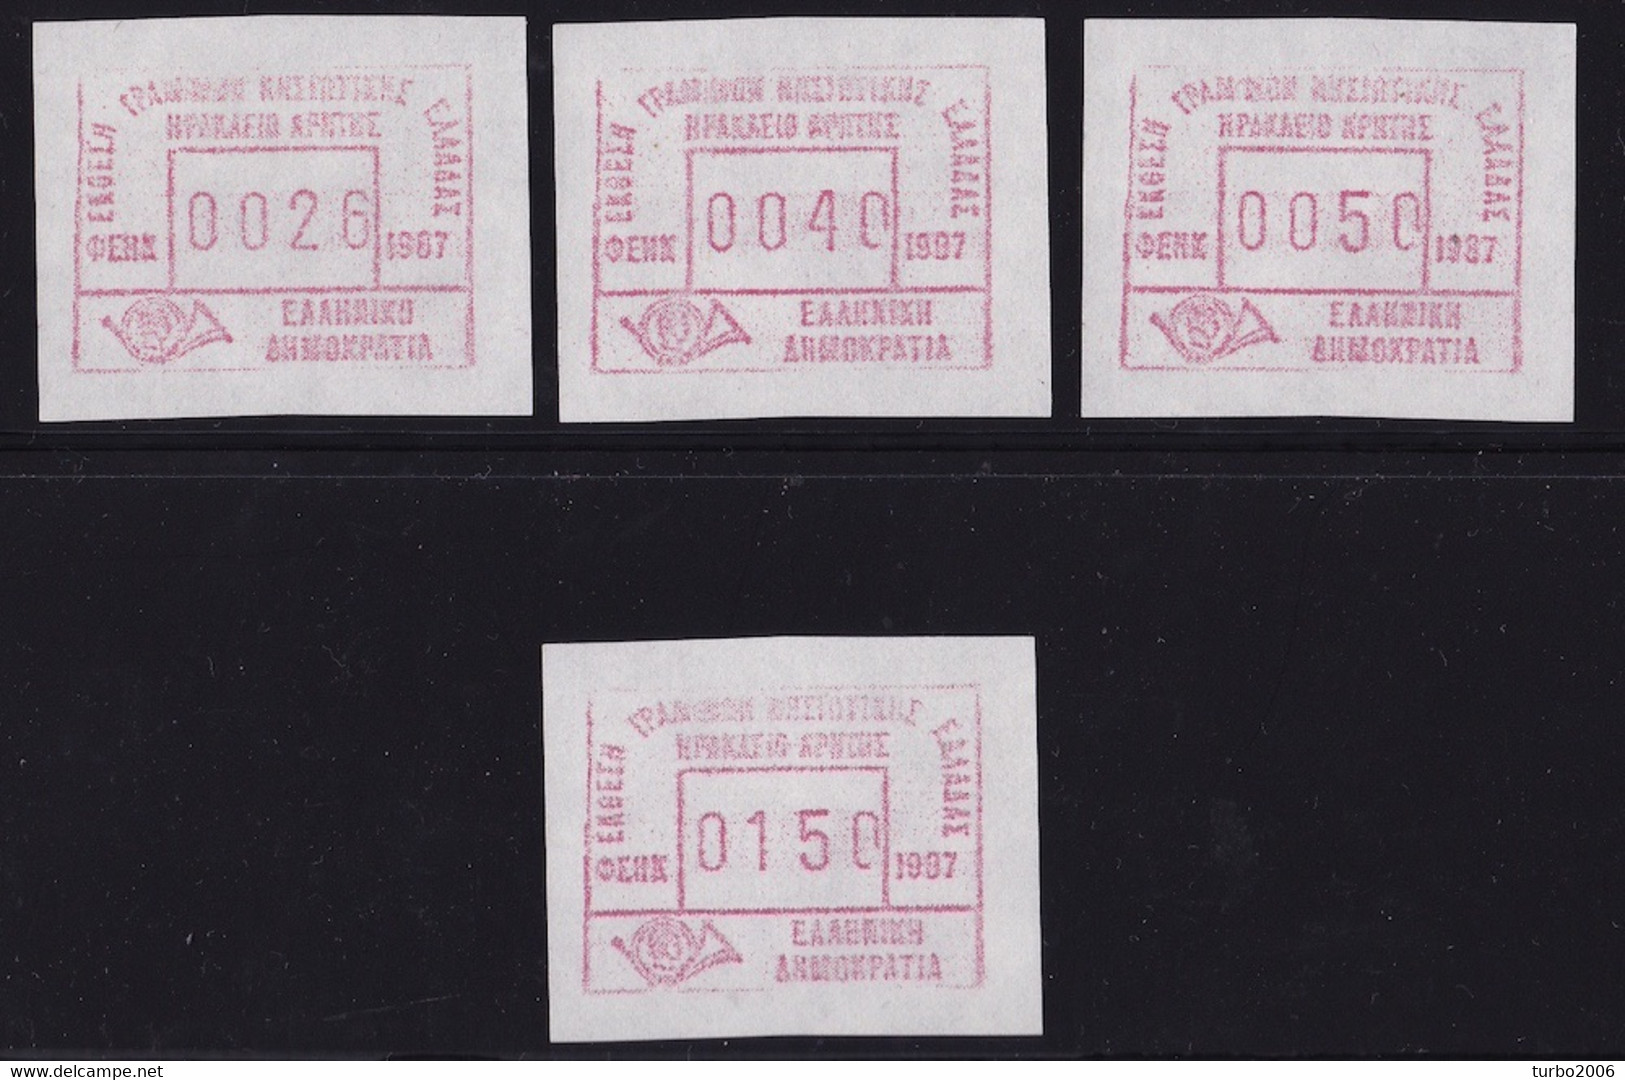 GREECE 1987 FRAMA Stamps For Philatelic Exhabition Of Heraklion Exhabition Set Of 26-40-50 Dr + 150 D MNH Hellas M 14 I - Timbres De Distributeurs [ATM]